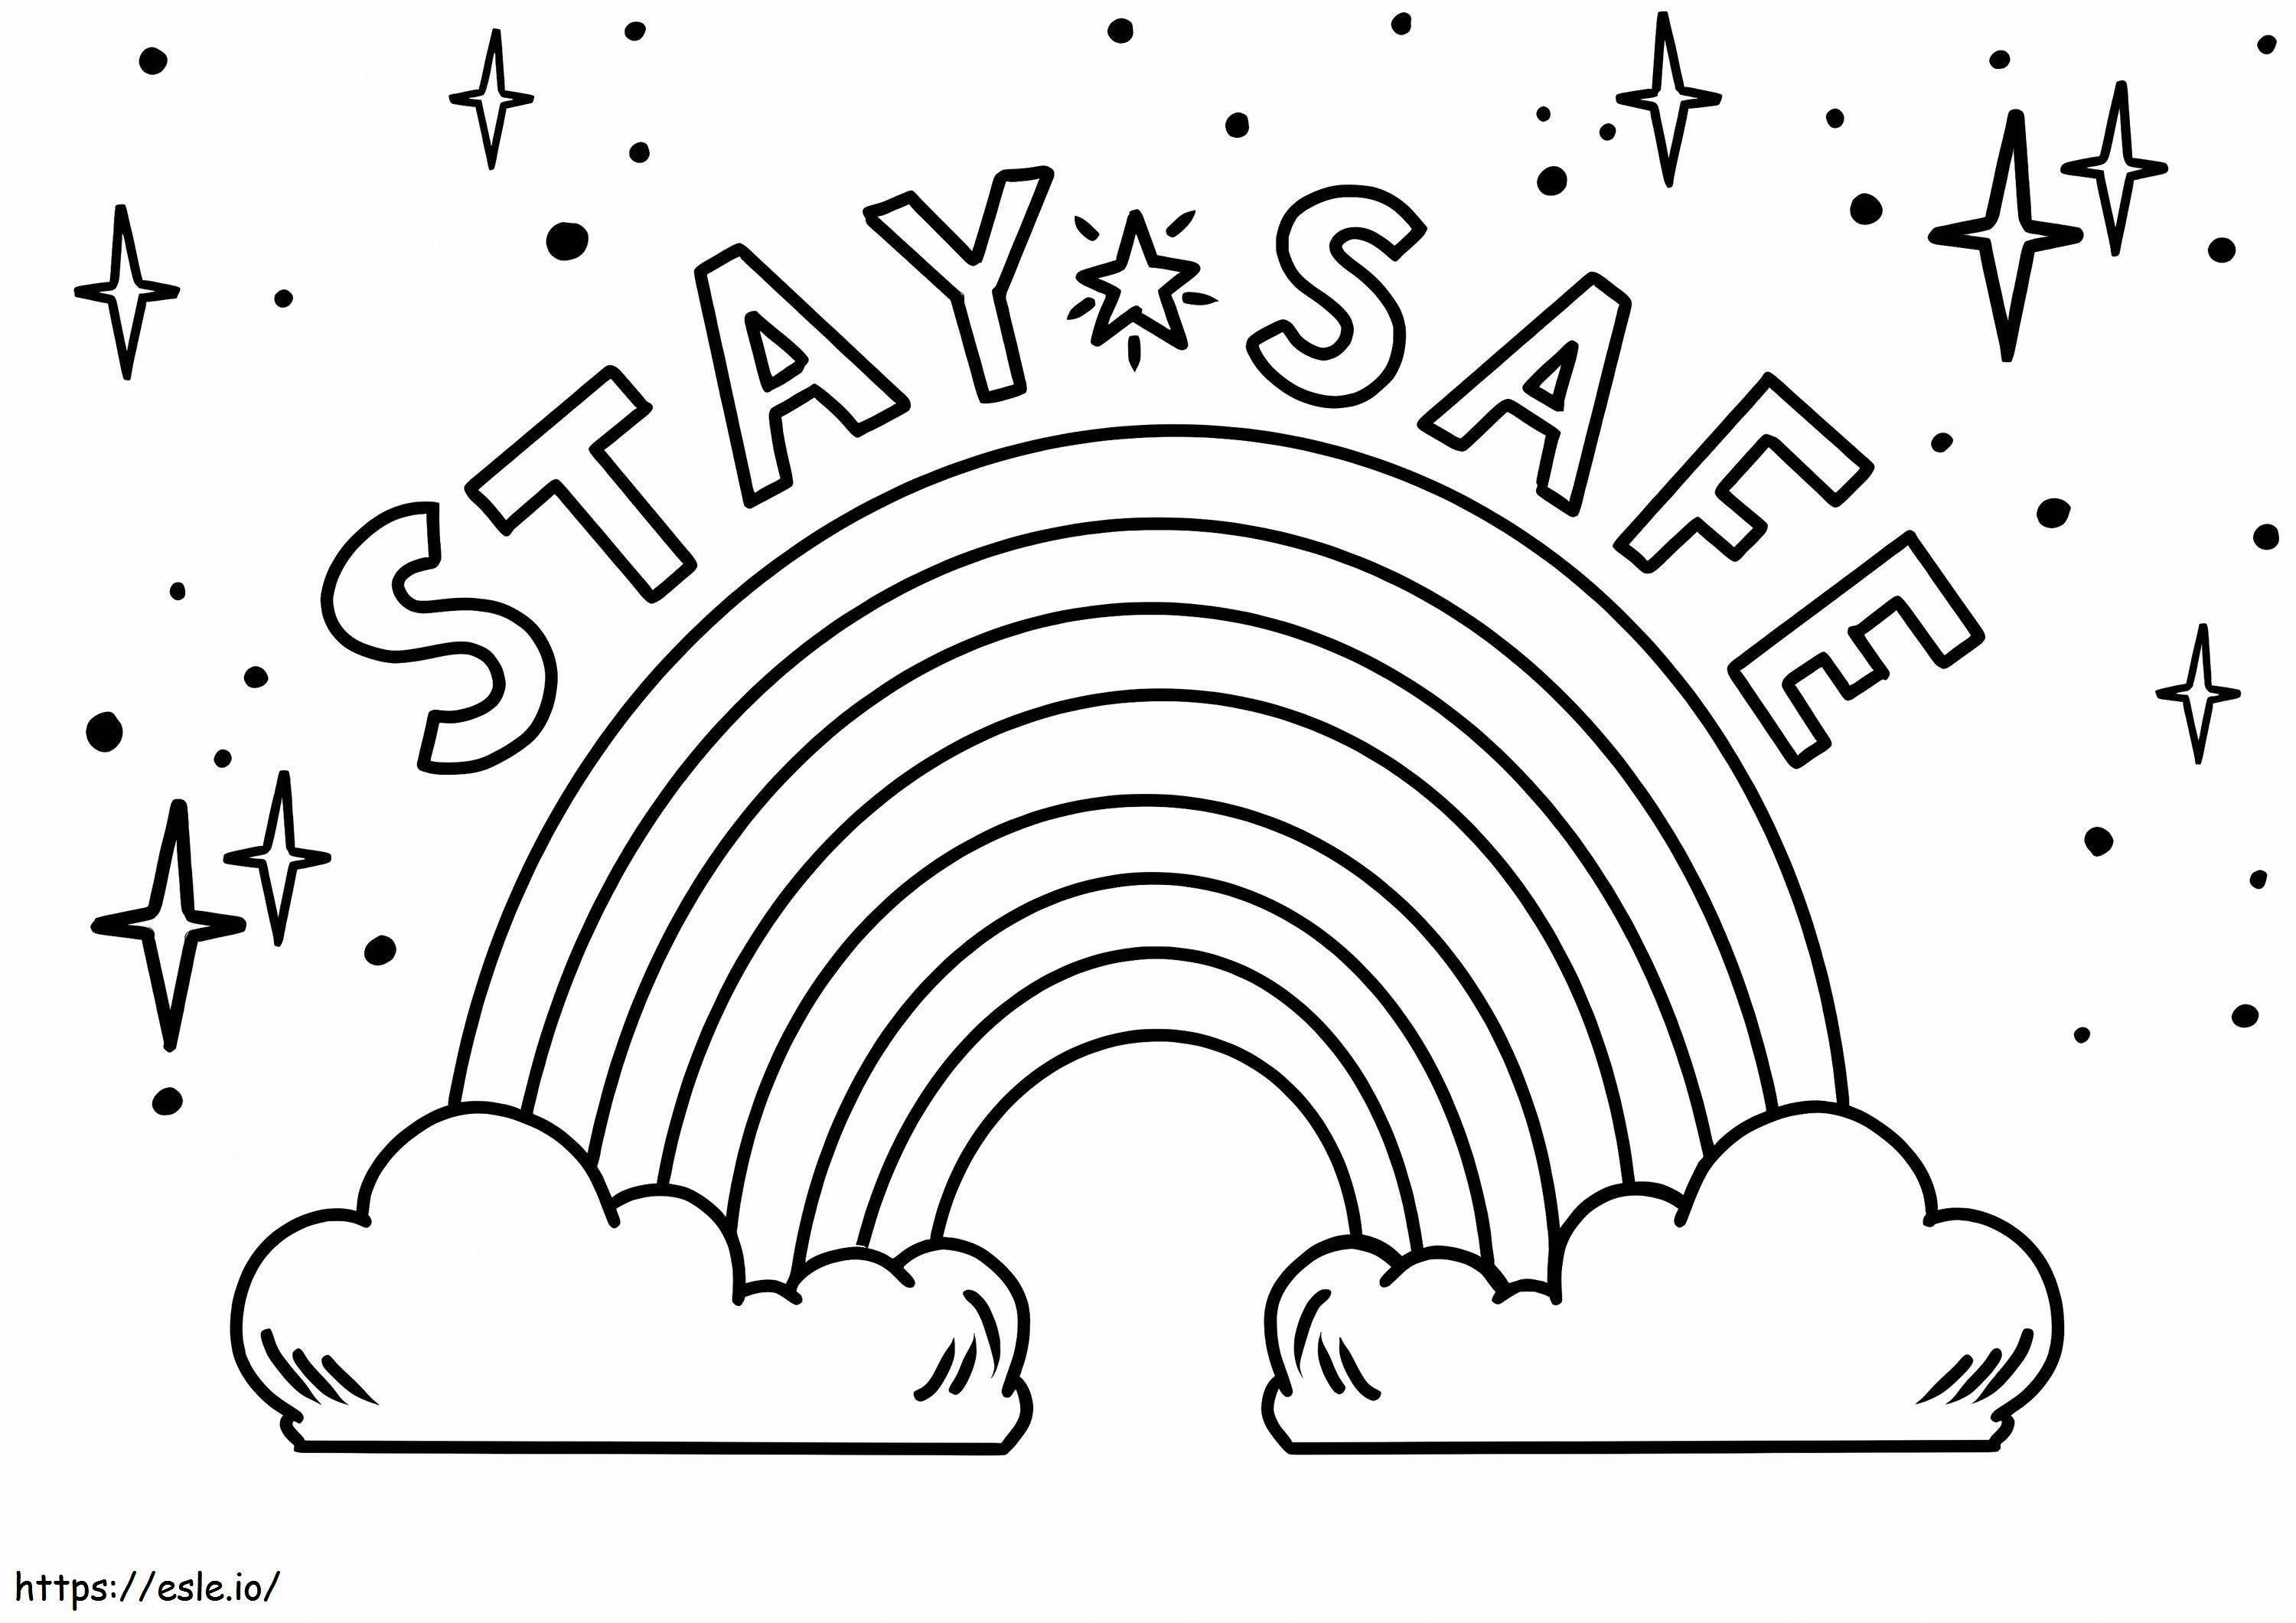 Stay Safe Rainbow coloring page